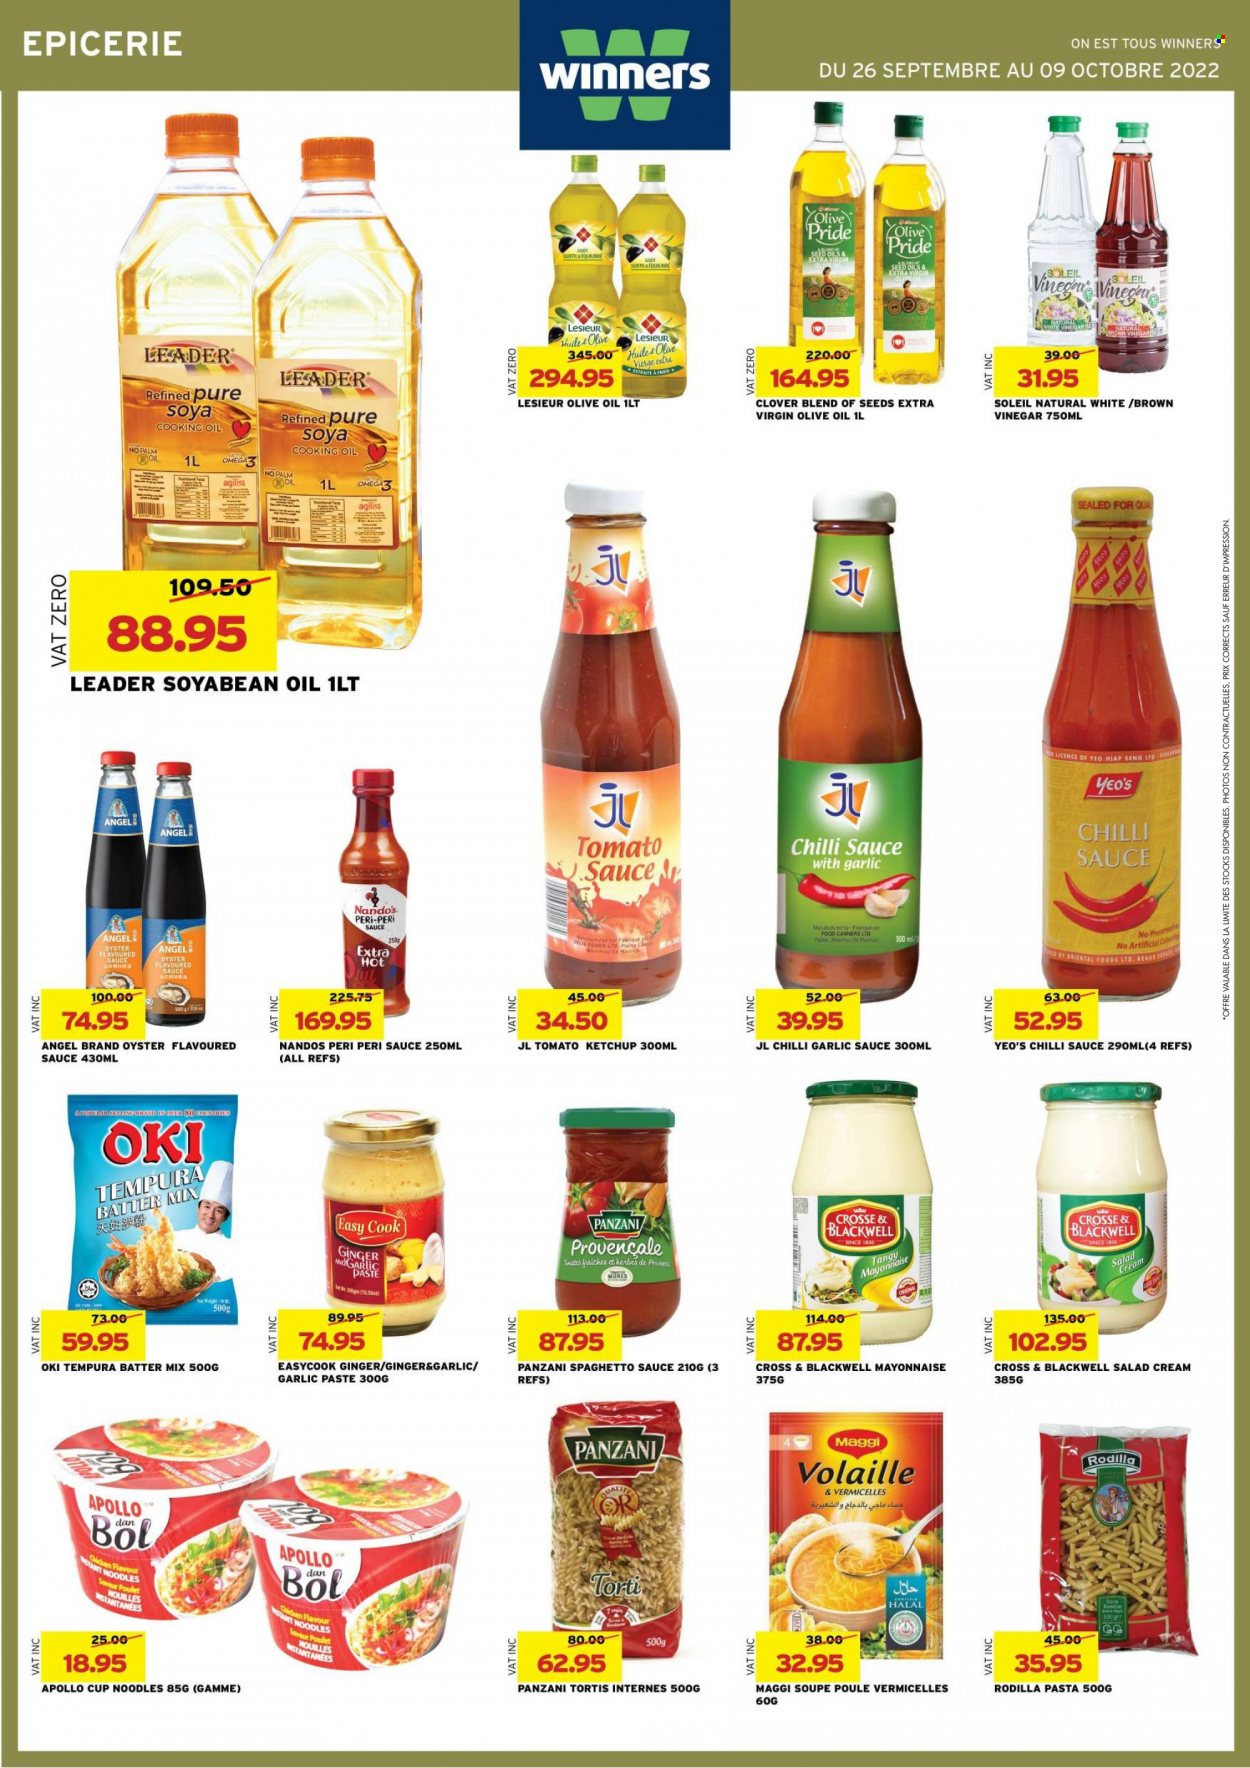 thumbnail - Winner's Catalogue - 26.09.2022 - 9.10.2022 - Sales products - ginger, oysters, pasta, sauce, noodles cup, noodles, Clover, mayonnaise, salad cream, Maggi, tomato sauce, chilli sauce, peri peri sauce, garlic sauce, garlic paste, extra virgin olive oil, vinegar, olive oil, oil, brown vinegar, cooking oil, ketchup. Page 16.